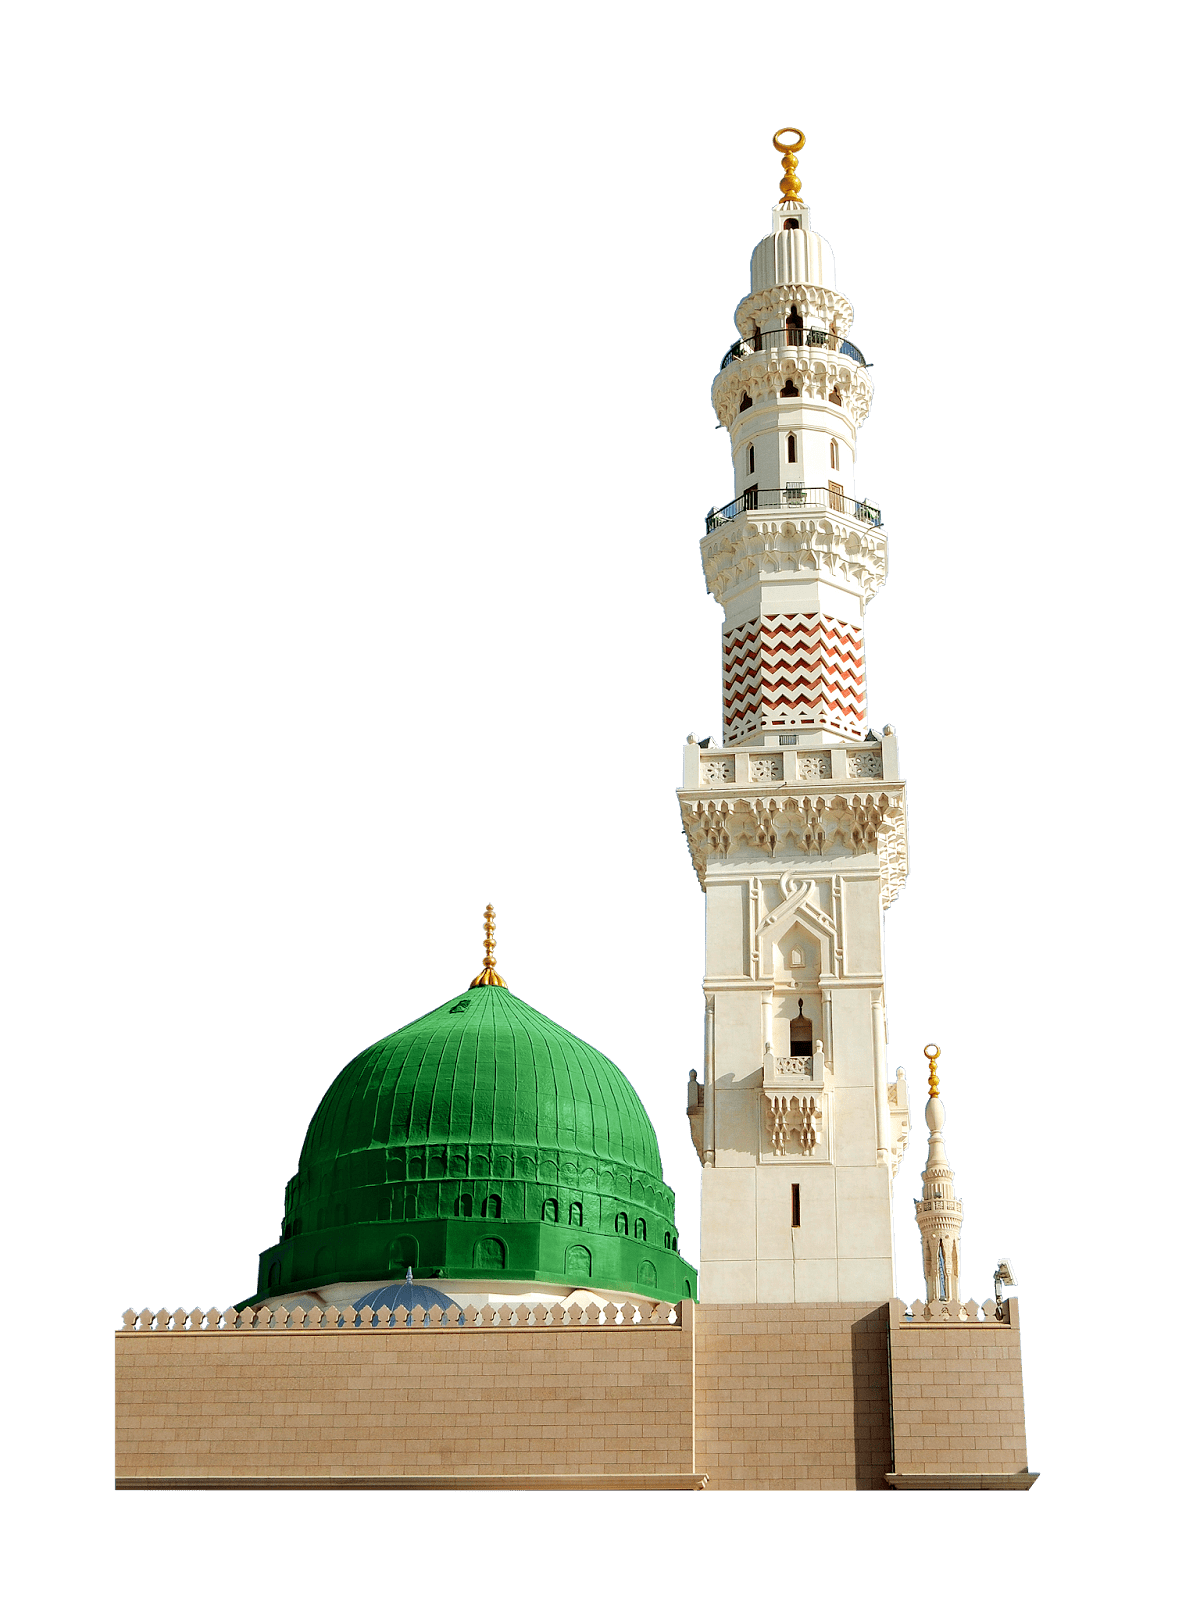 Events ihf ihfprophmosque. Mosque clipart mosque dome